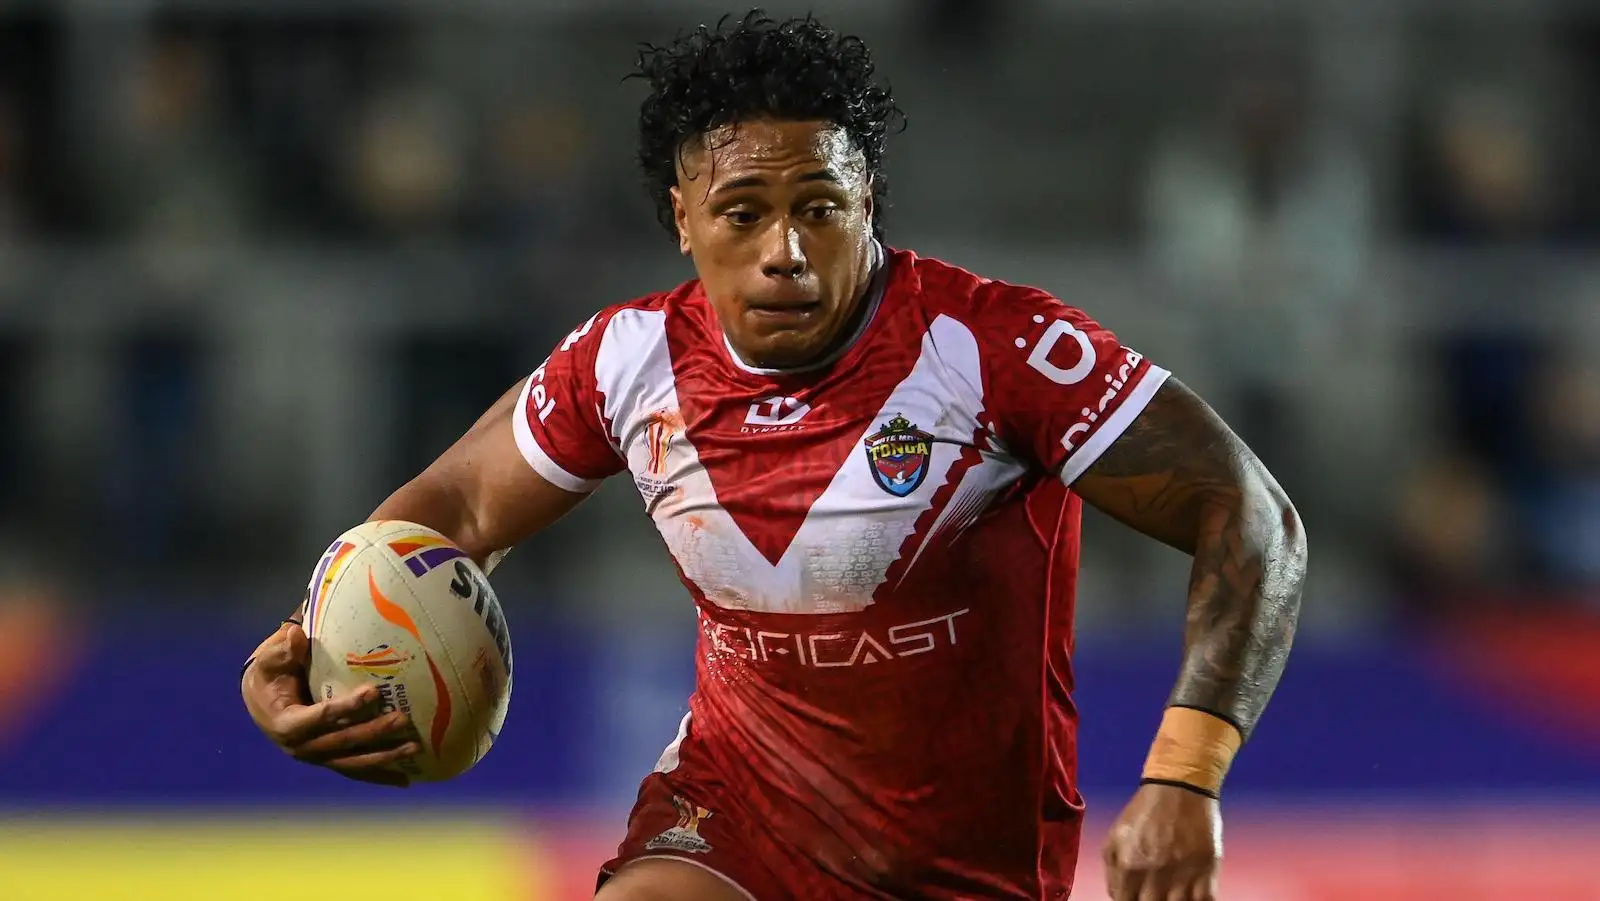 Super League clubs alerted to availability of Tongan international for 2025